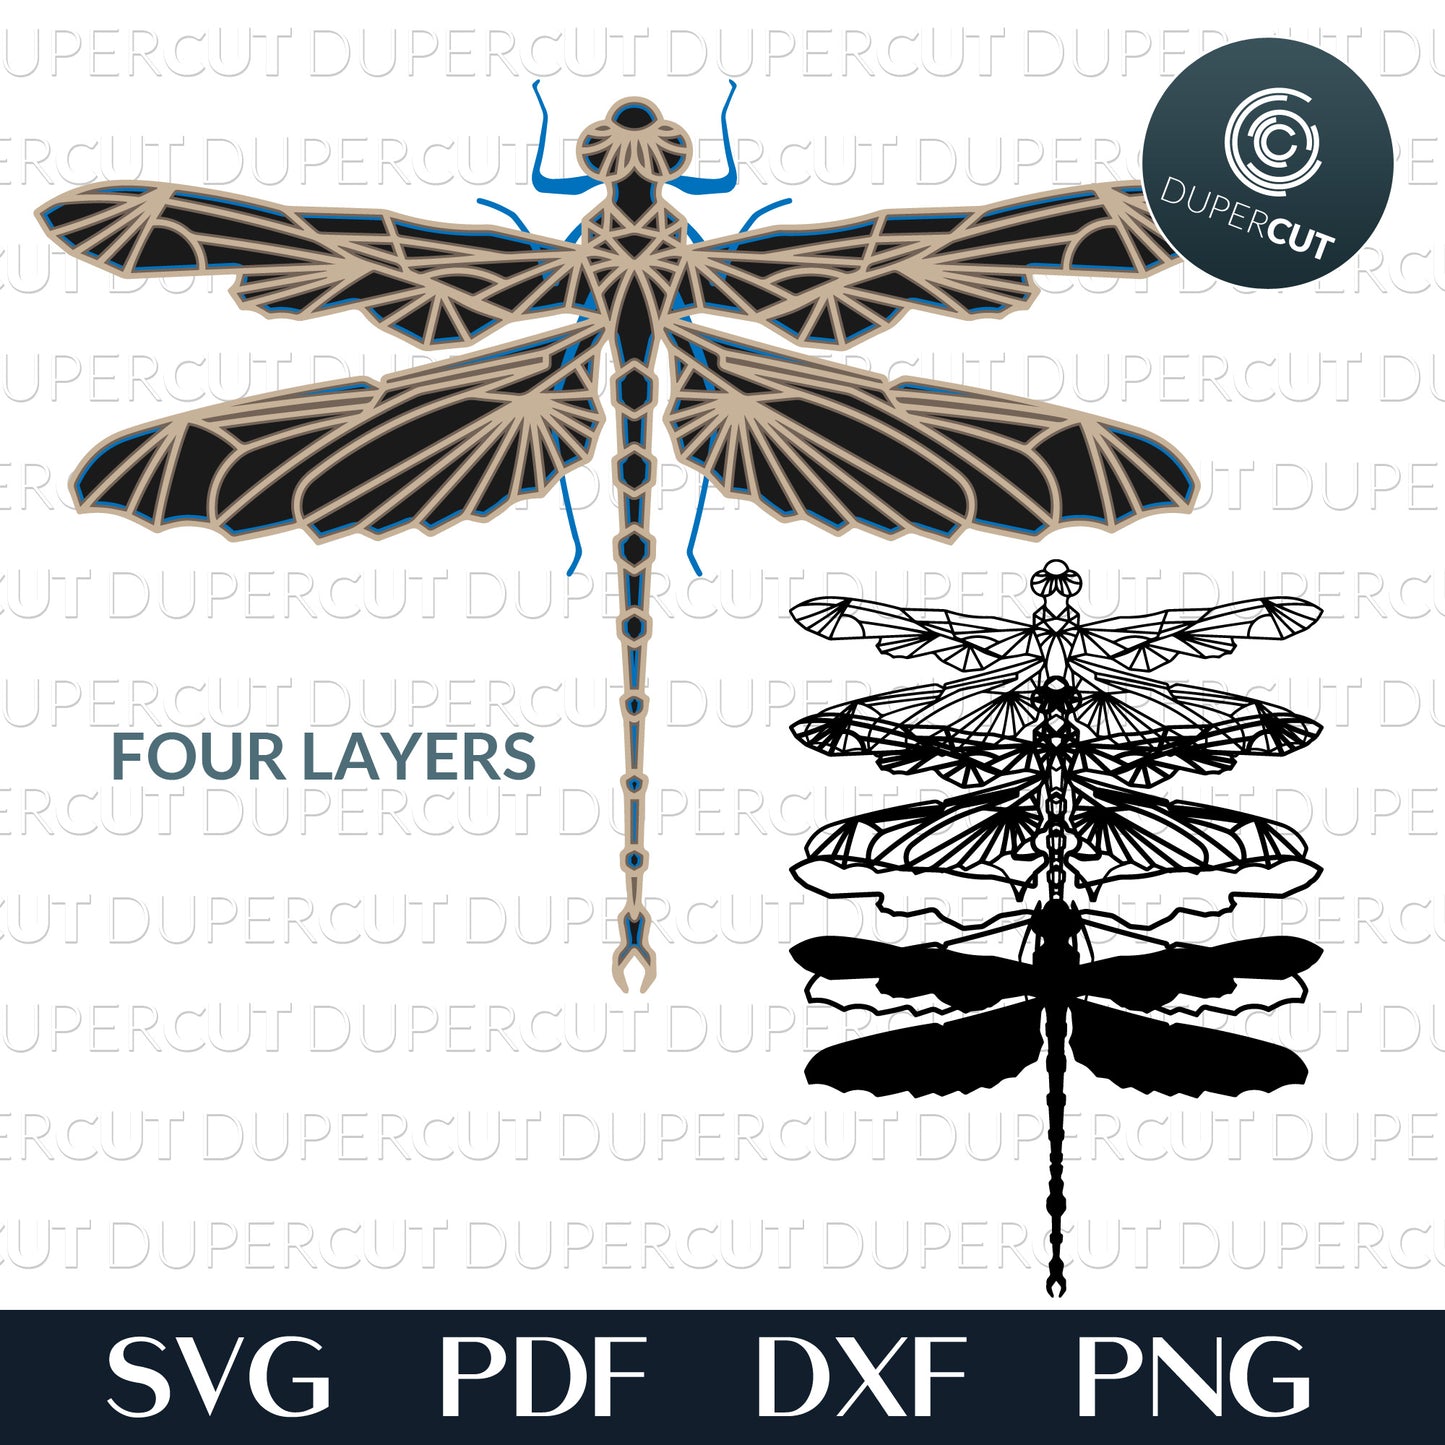 Dragonfly layered laser files, SVG PNG DXF files for cutting, laser engraving, scrapbooking. For use with Cricut, Glowforge, Silhouette, CNC machines.